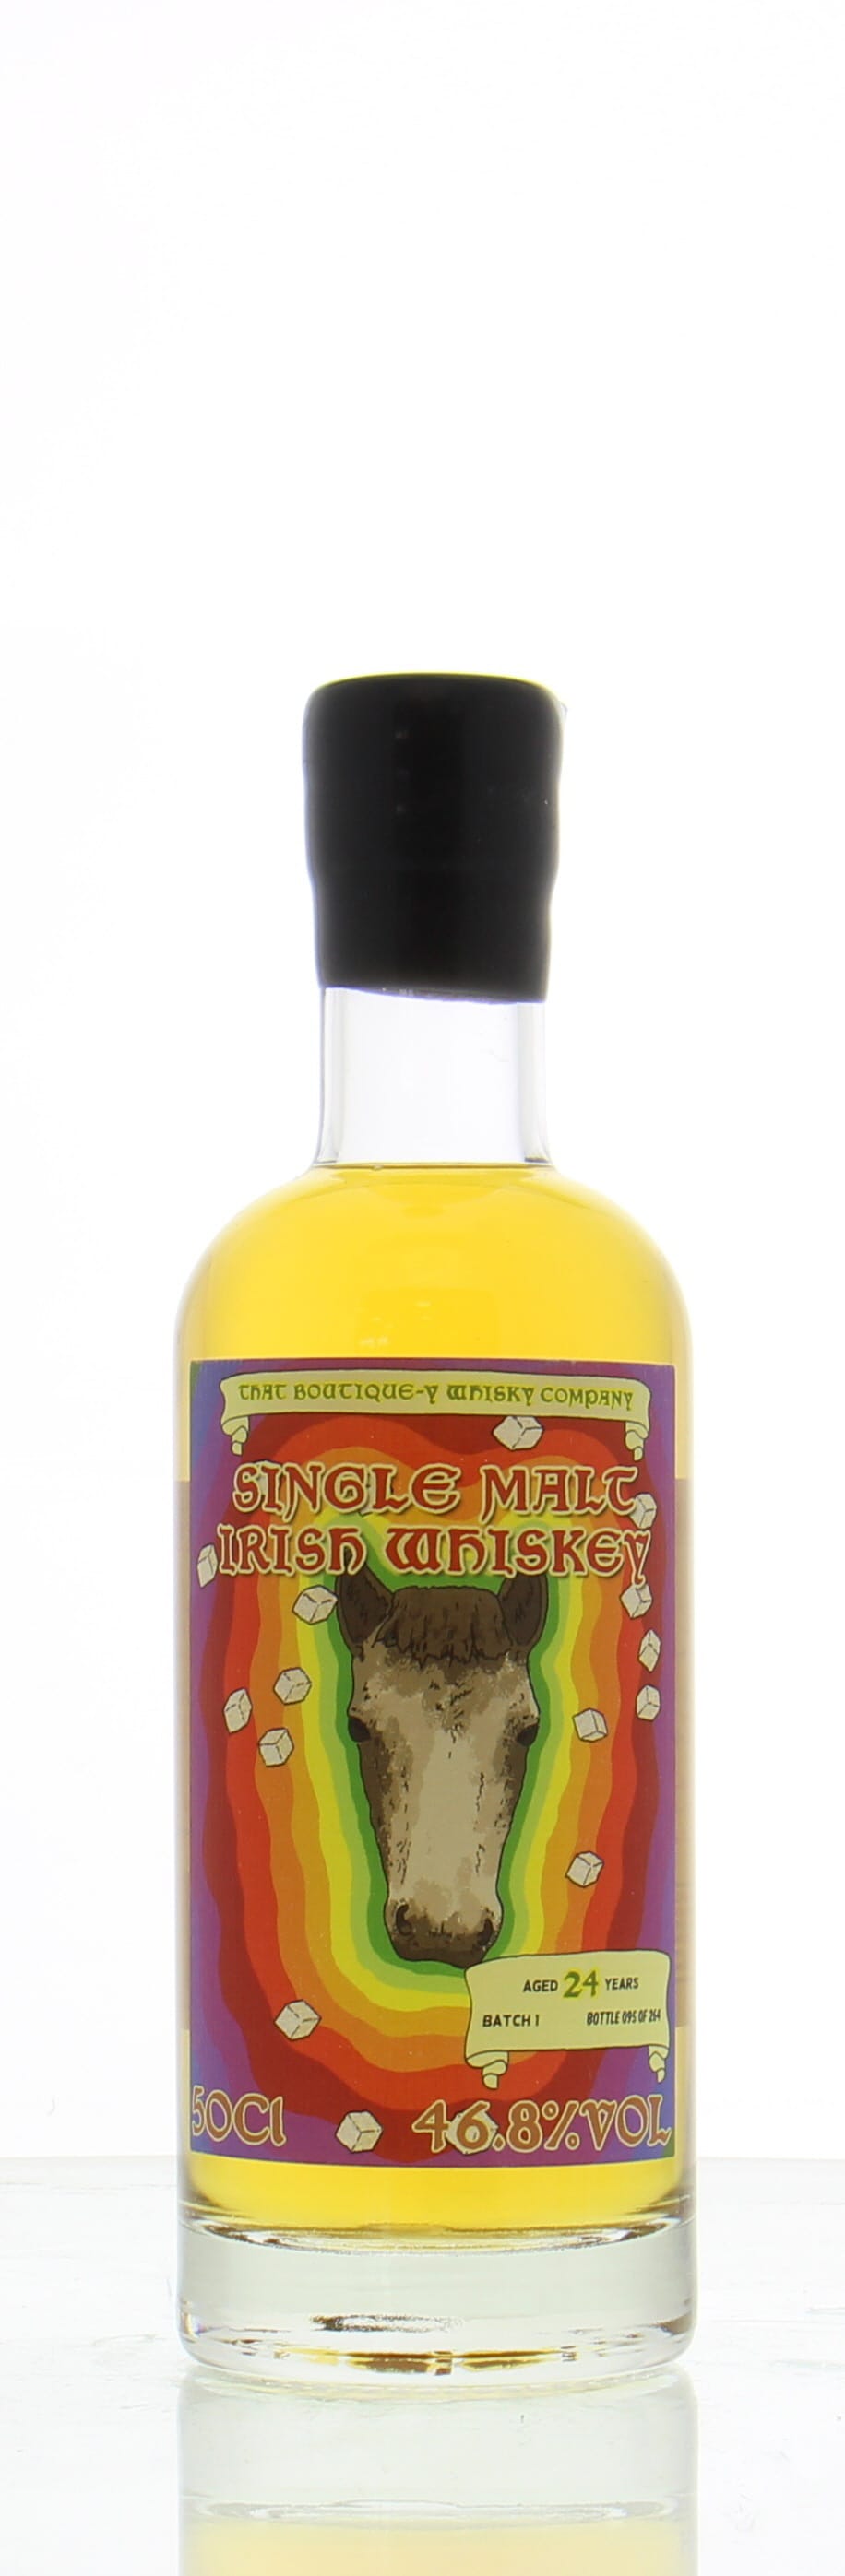 Ireland - Irish Whiskey 24 Years Old Batch 1 That Boutique-y Whisky Company 46.8% NV Perfect